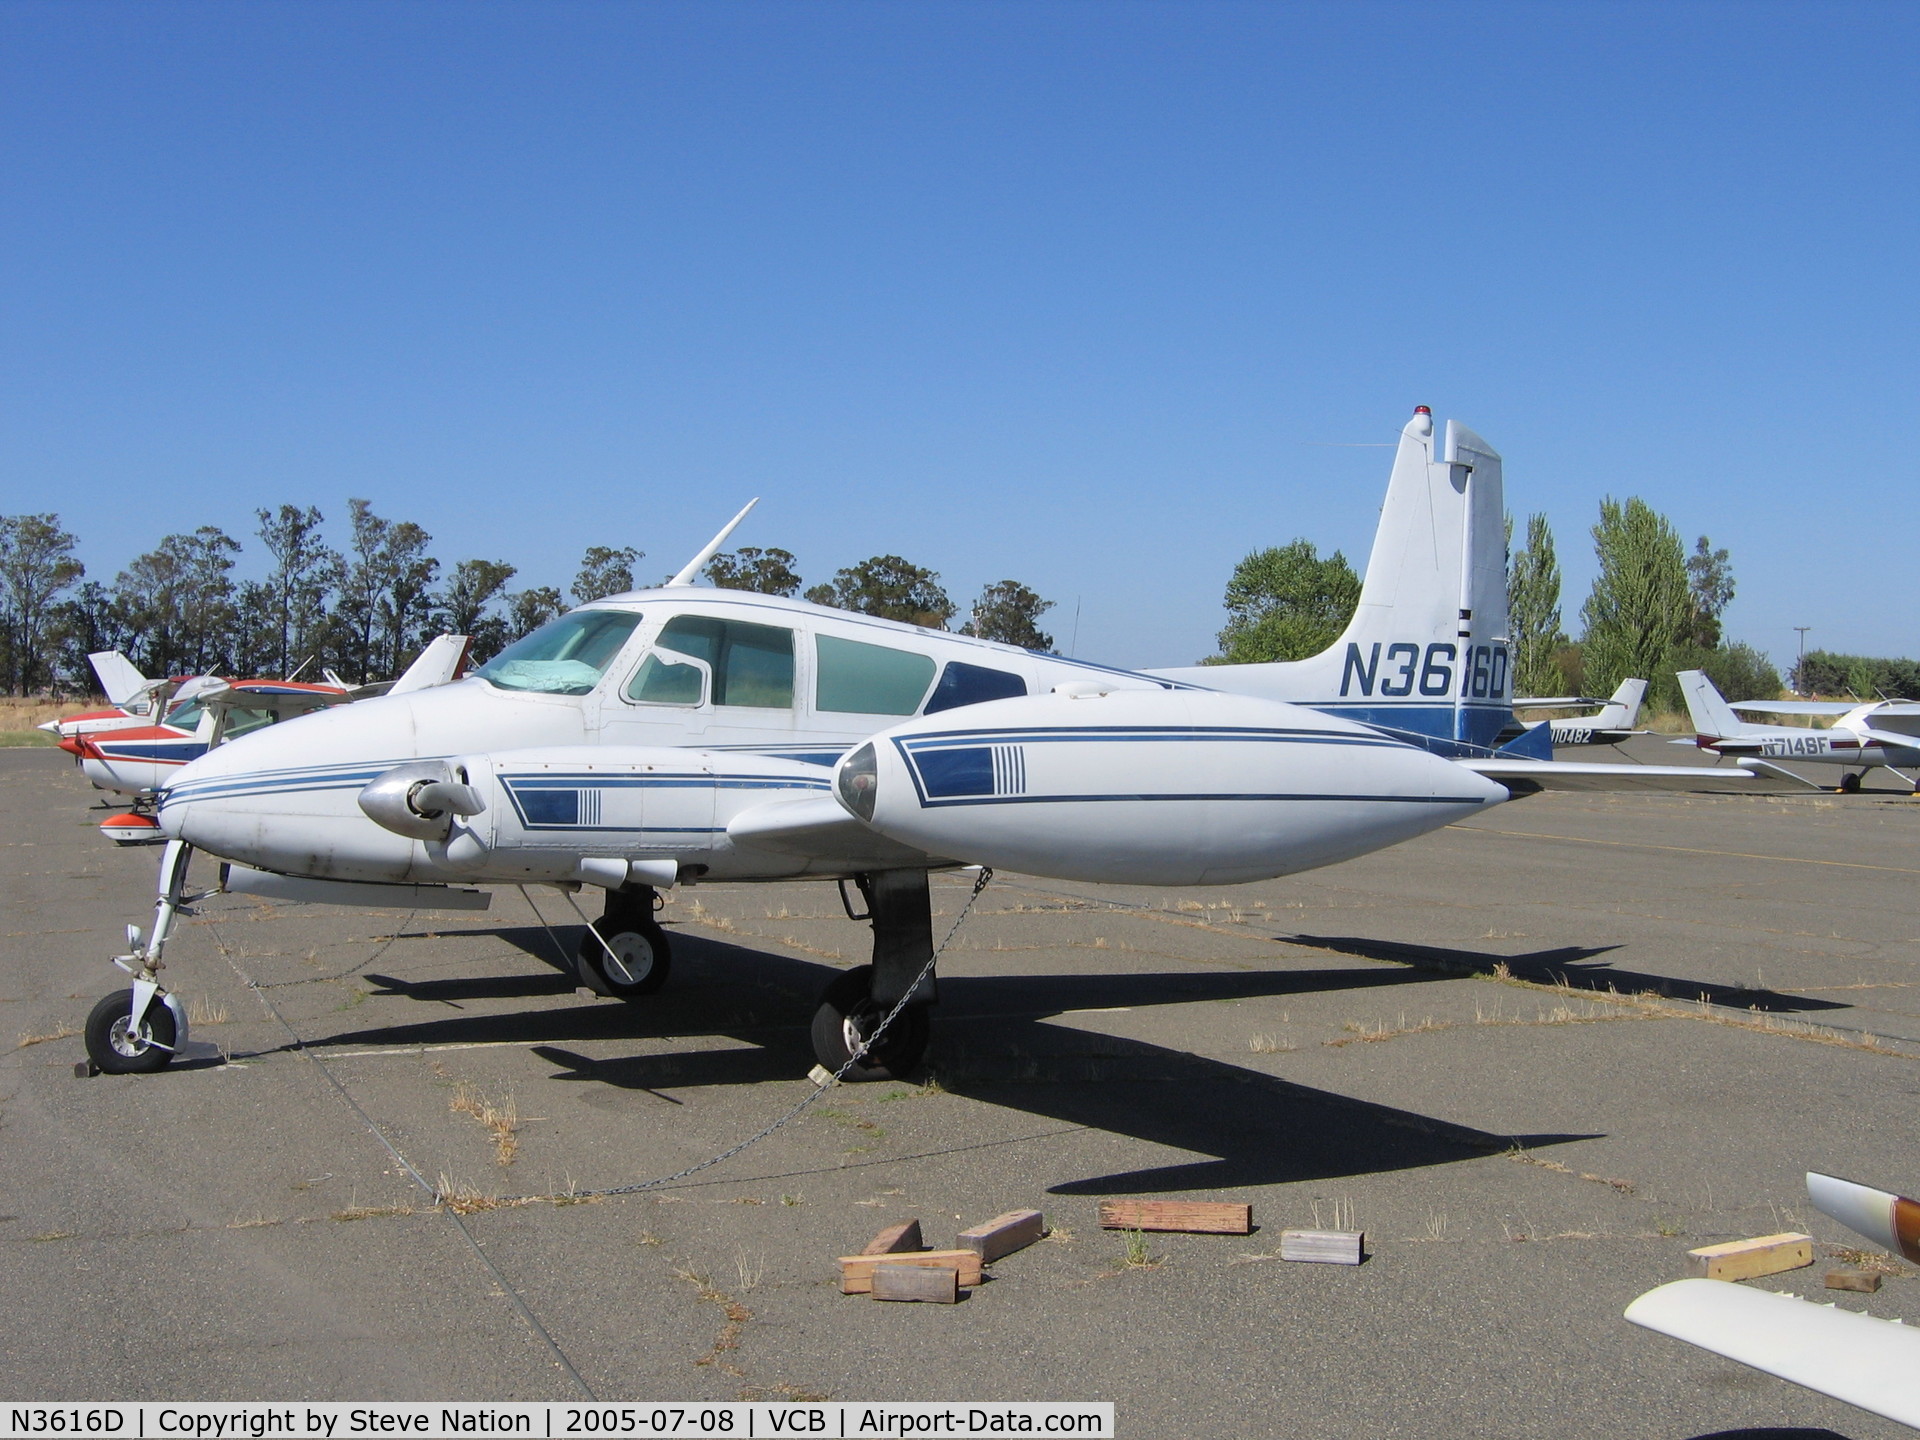 N3616D, 1956 Cessna 310 C/N 35316, 1956 Cessna 310 at Nut Tree Airport, Vacaville, CA